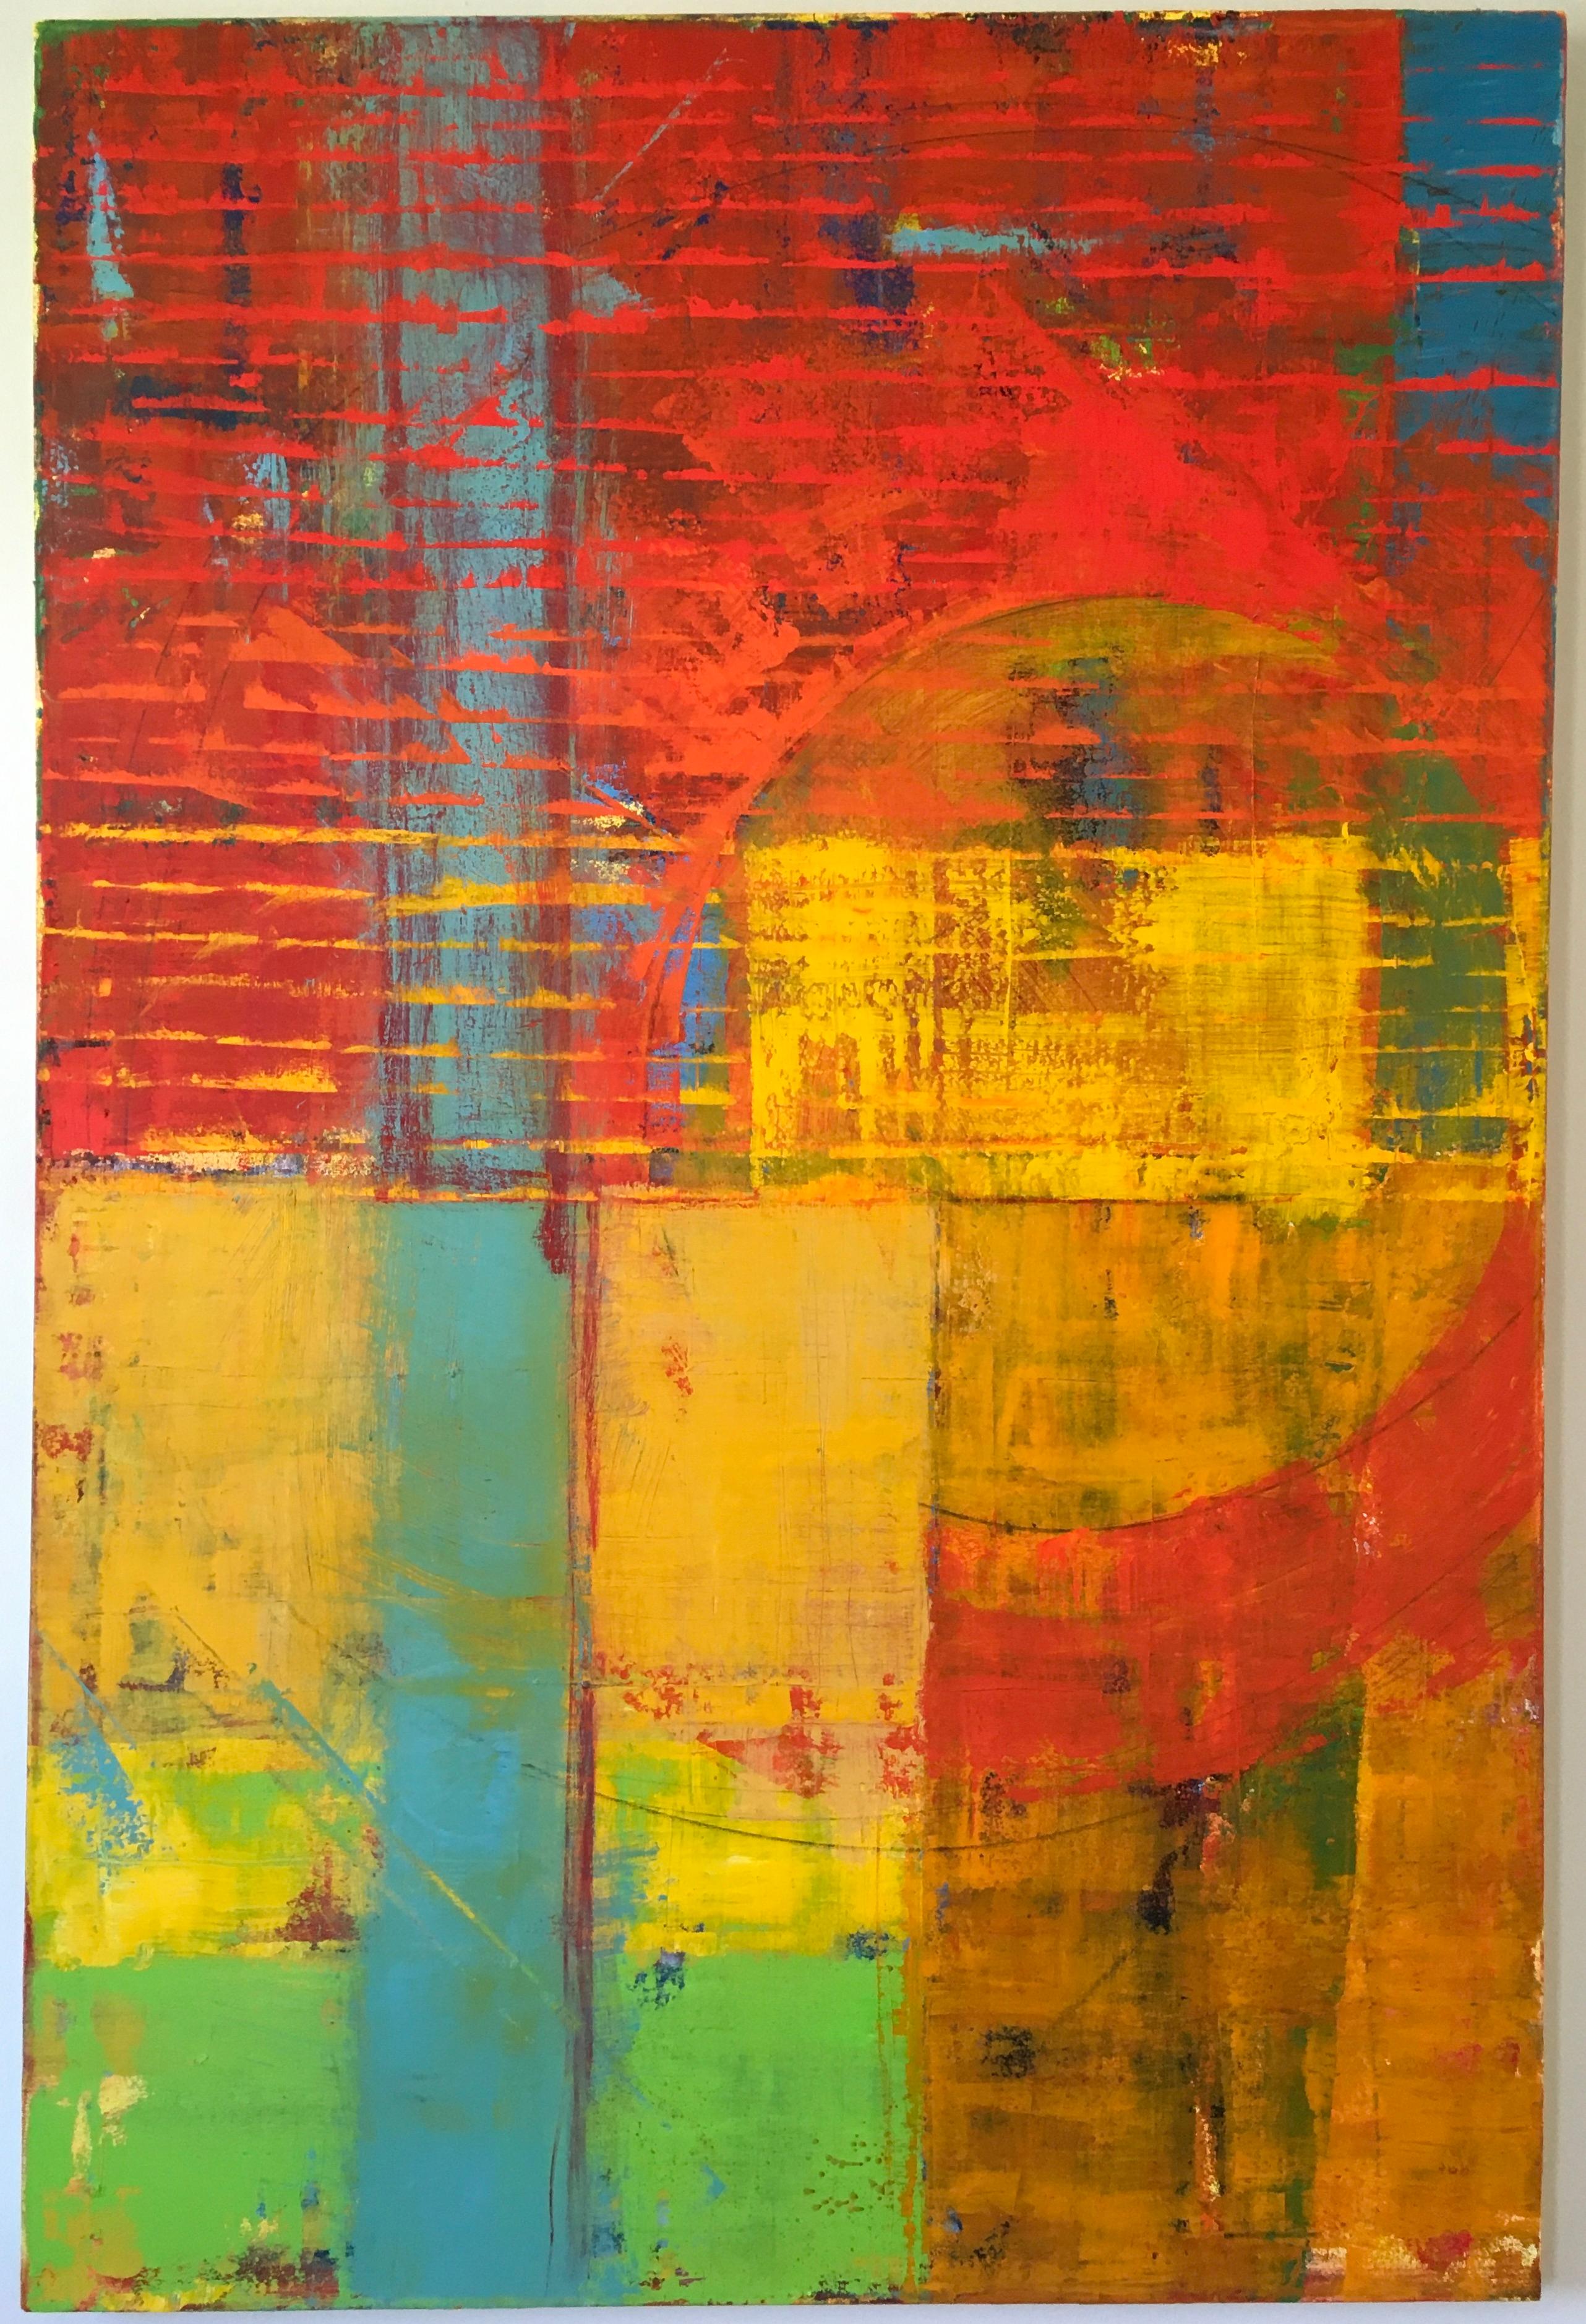 Anthony Dyke's "Solarium," a 74 x 48 x 1.25 inch oil on canvas painting, references solar flares in its use of shape and color. The bright values of yellows, reds and blues surround a large red circular shape. The bright color wavelengths give this